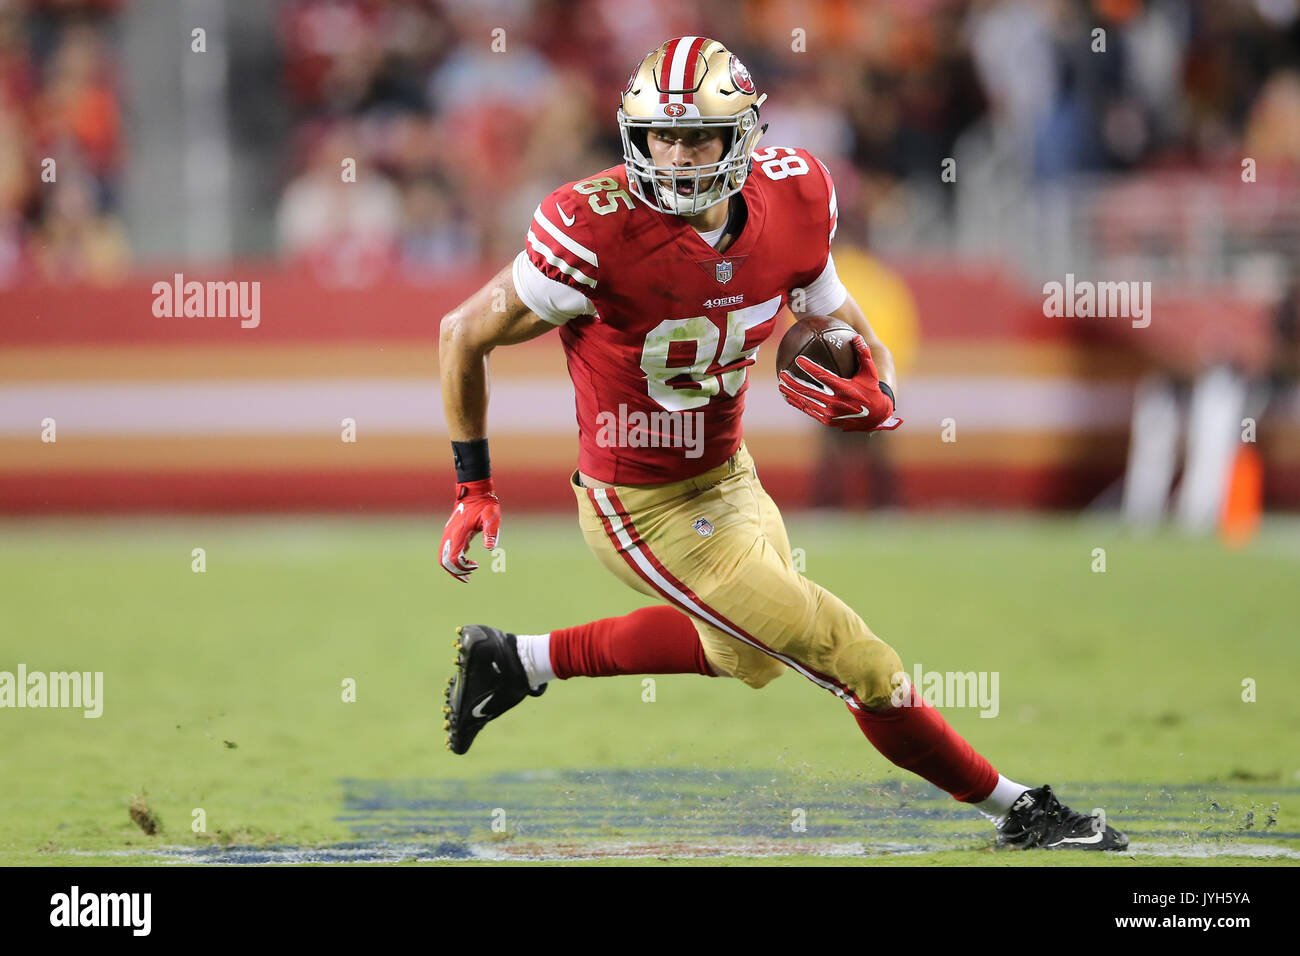 August 19, 2017: San Francisco 49ers tight end George Kittle (85) runs for  a big gain after the catch in the game between the Denver Broncos and San  Francisco 49ers, Levi Stadium,